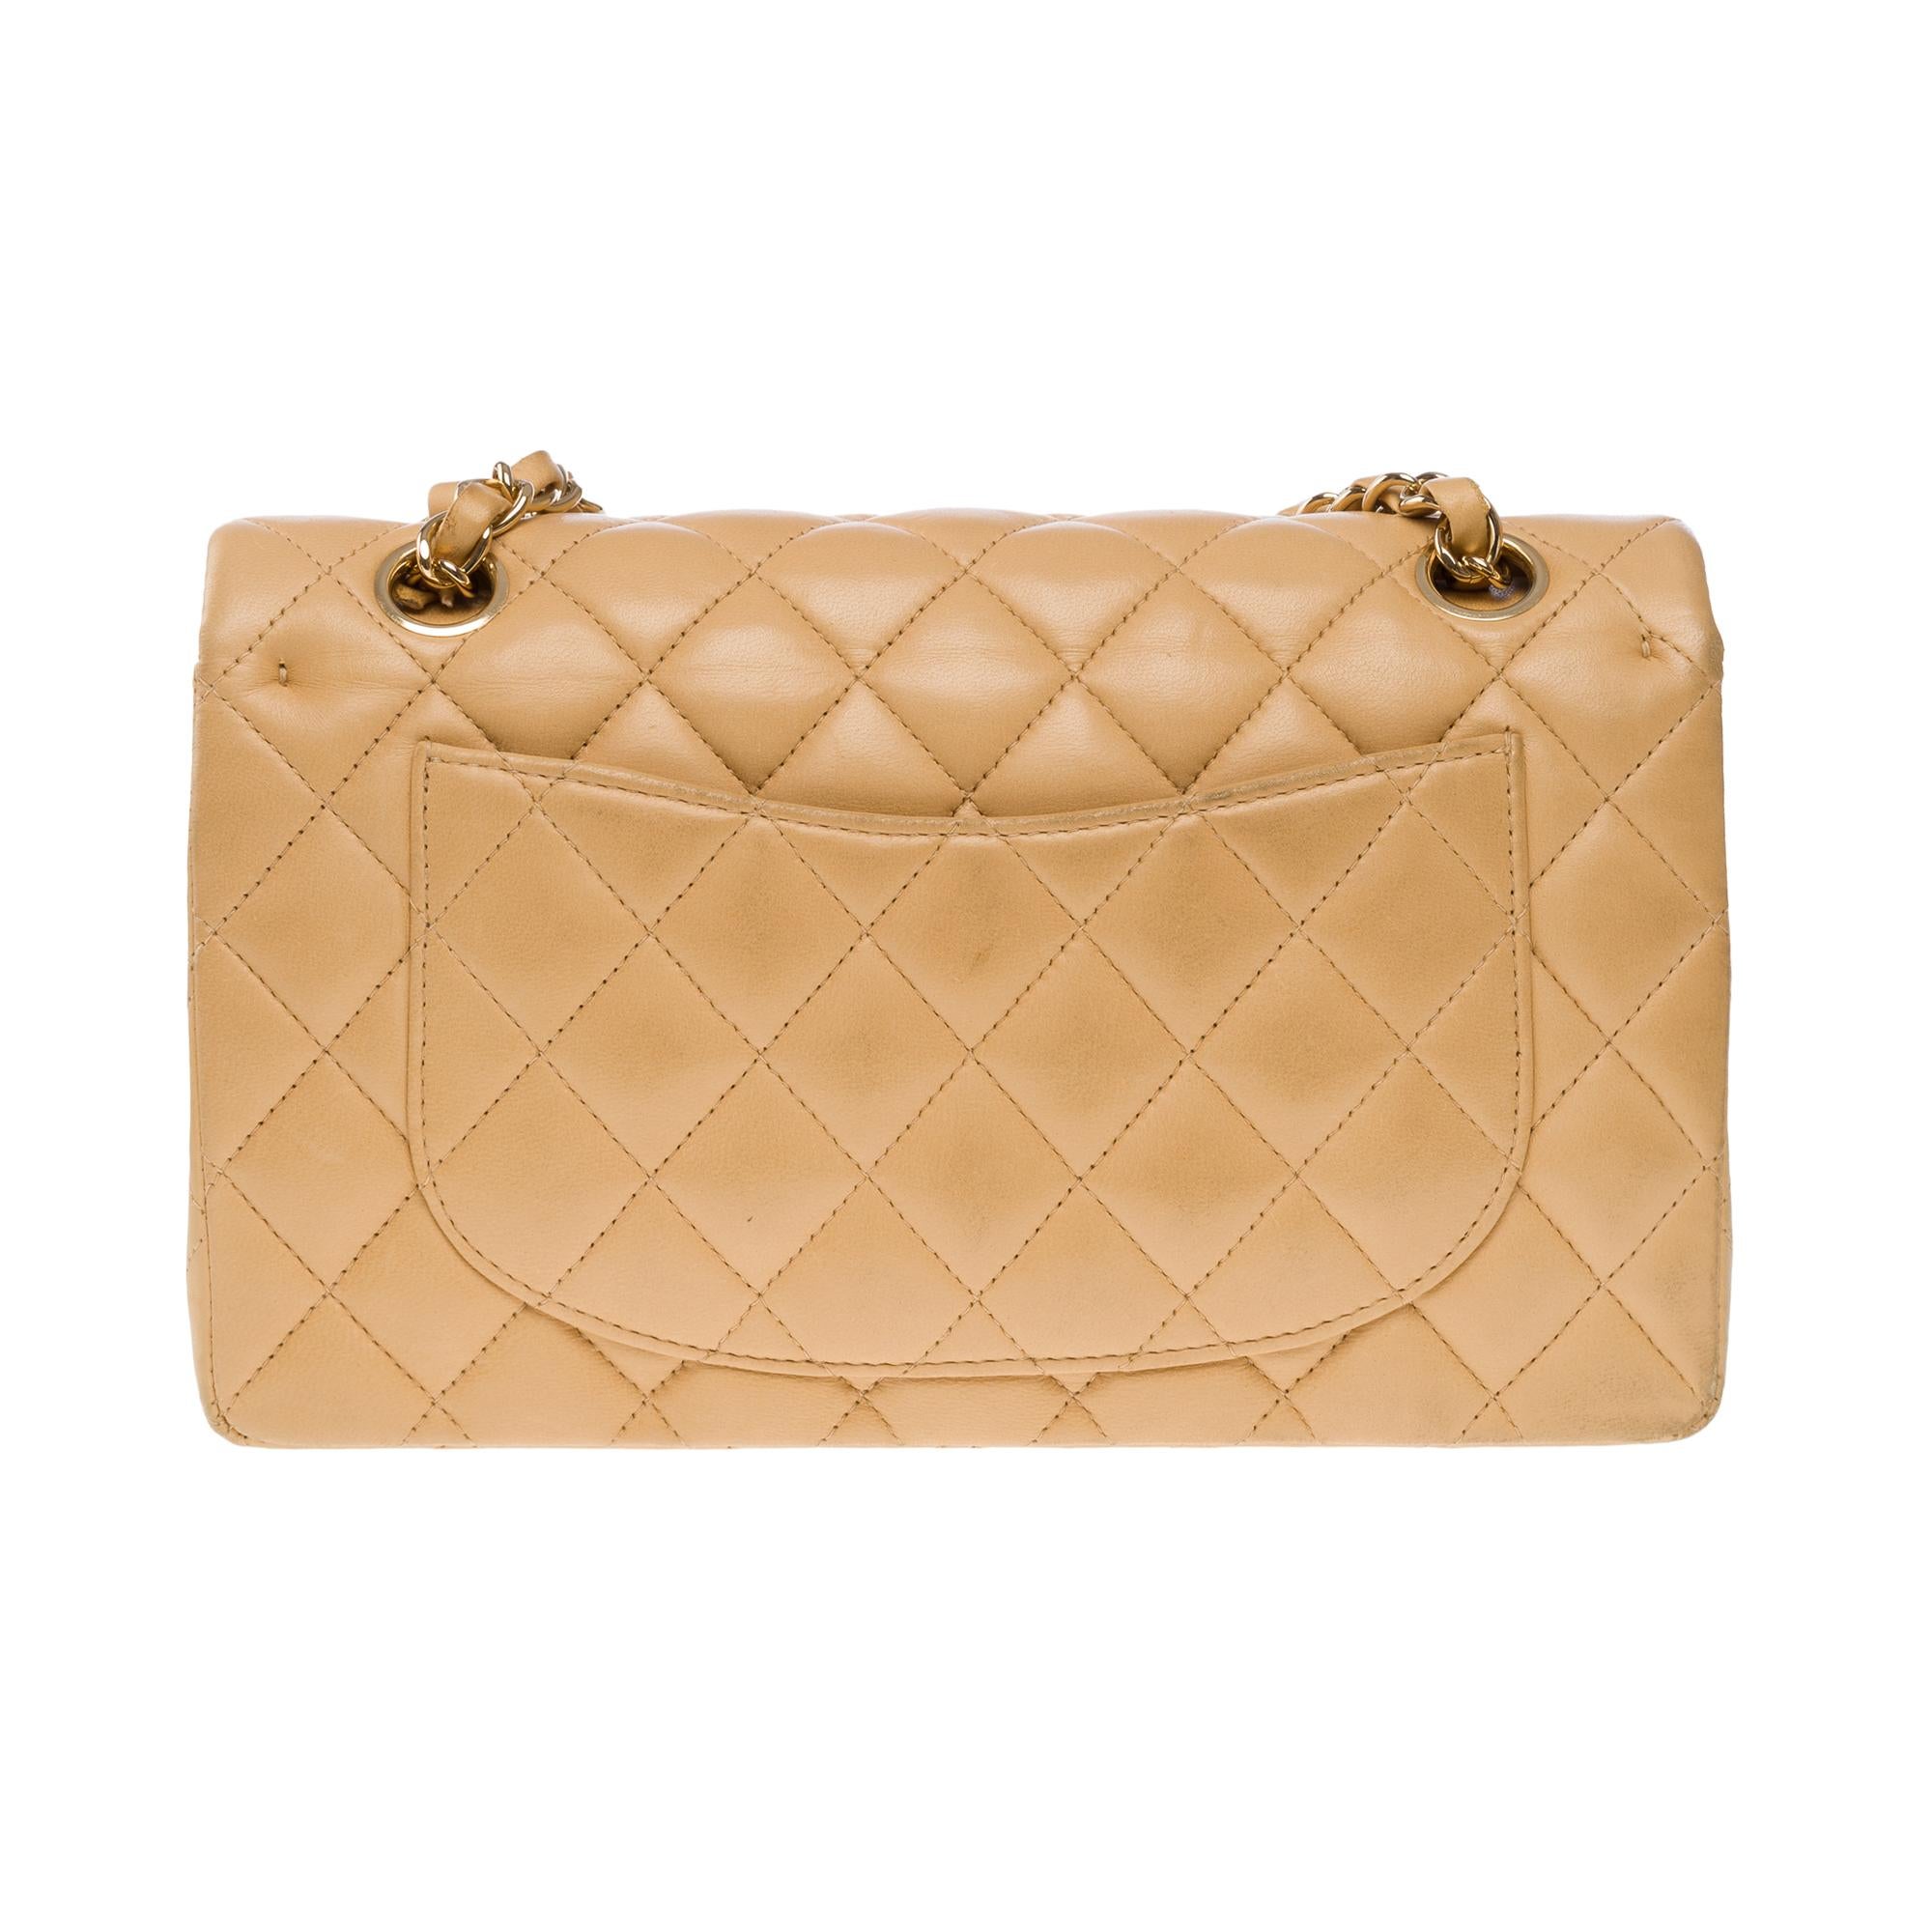 Women's Chanel Timeless 23cm double flap shoulder bag in beige quilted lambskin, GHW For Sale